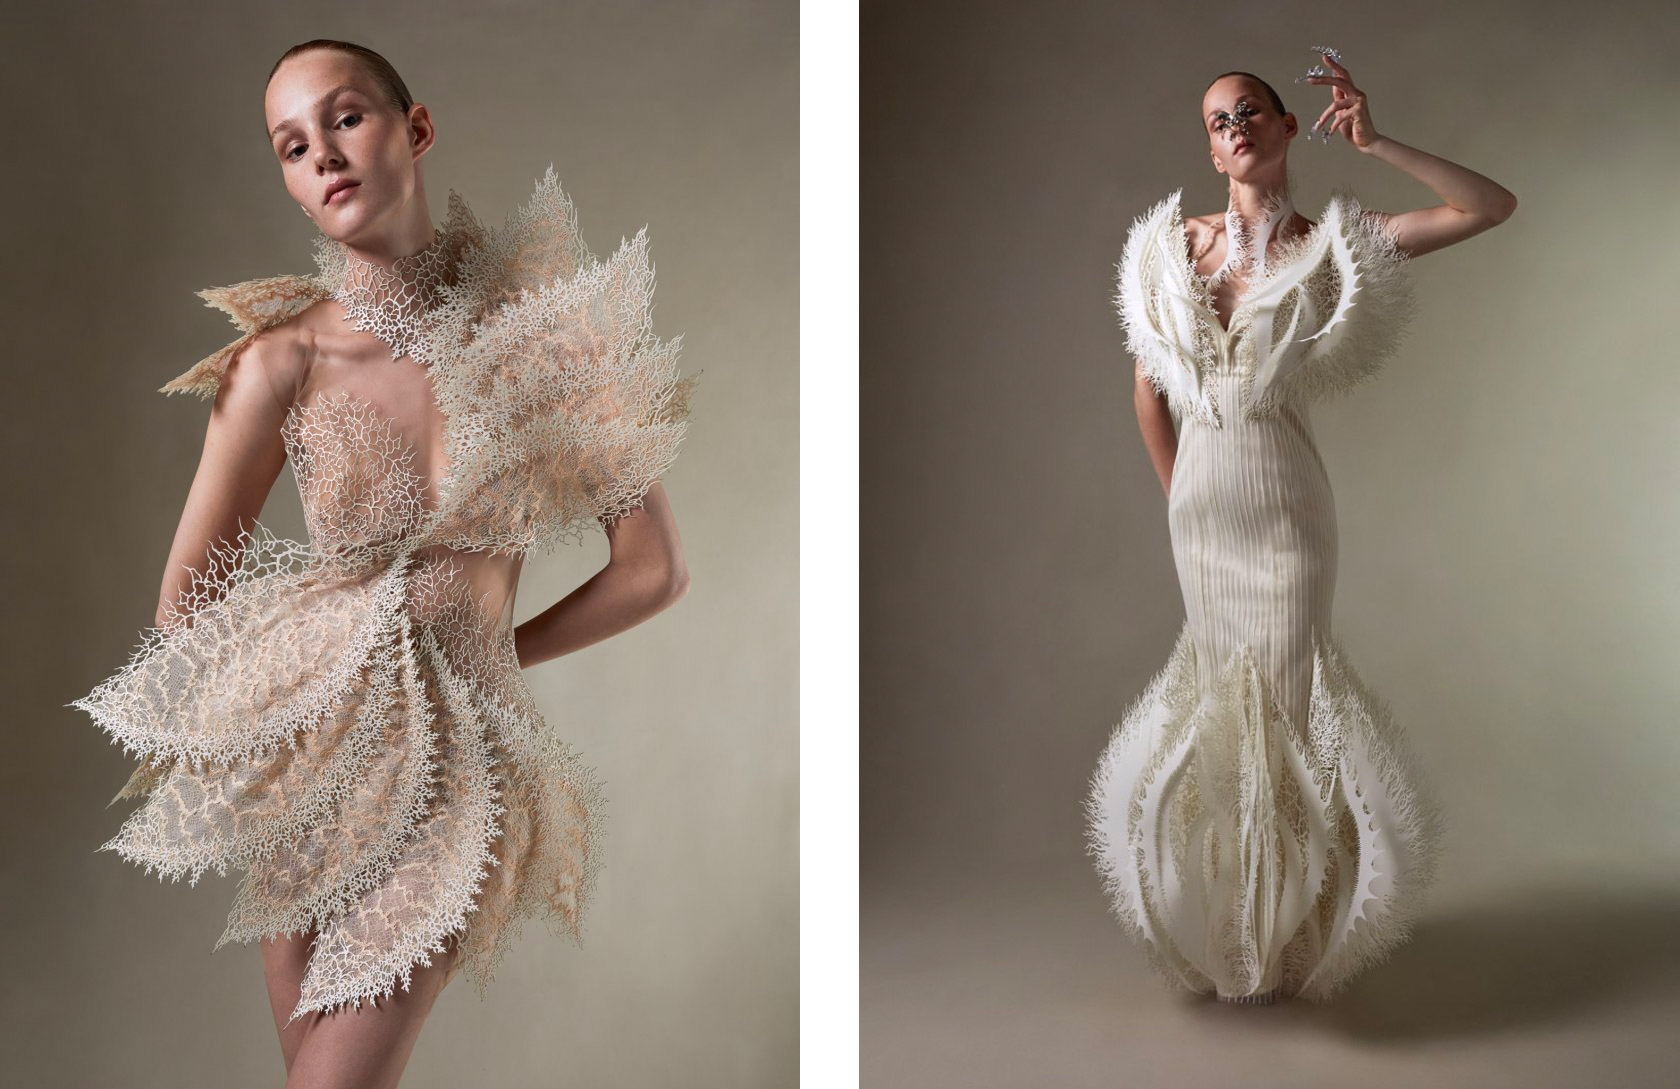 Earthrise: Sustainable Fashion Design by Iris van Herpen | Daily design inspiration for creatives | Inspiration Grid